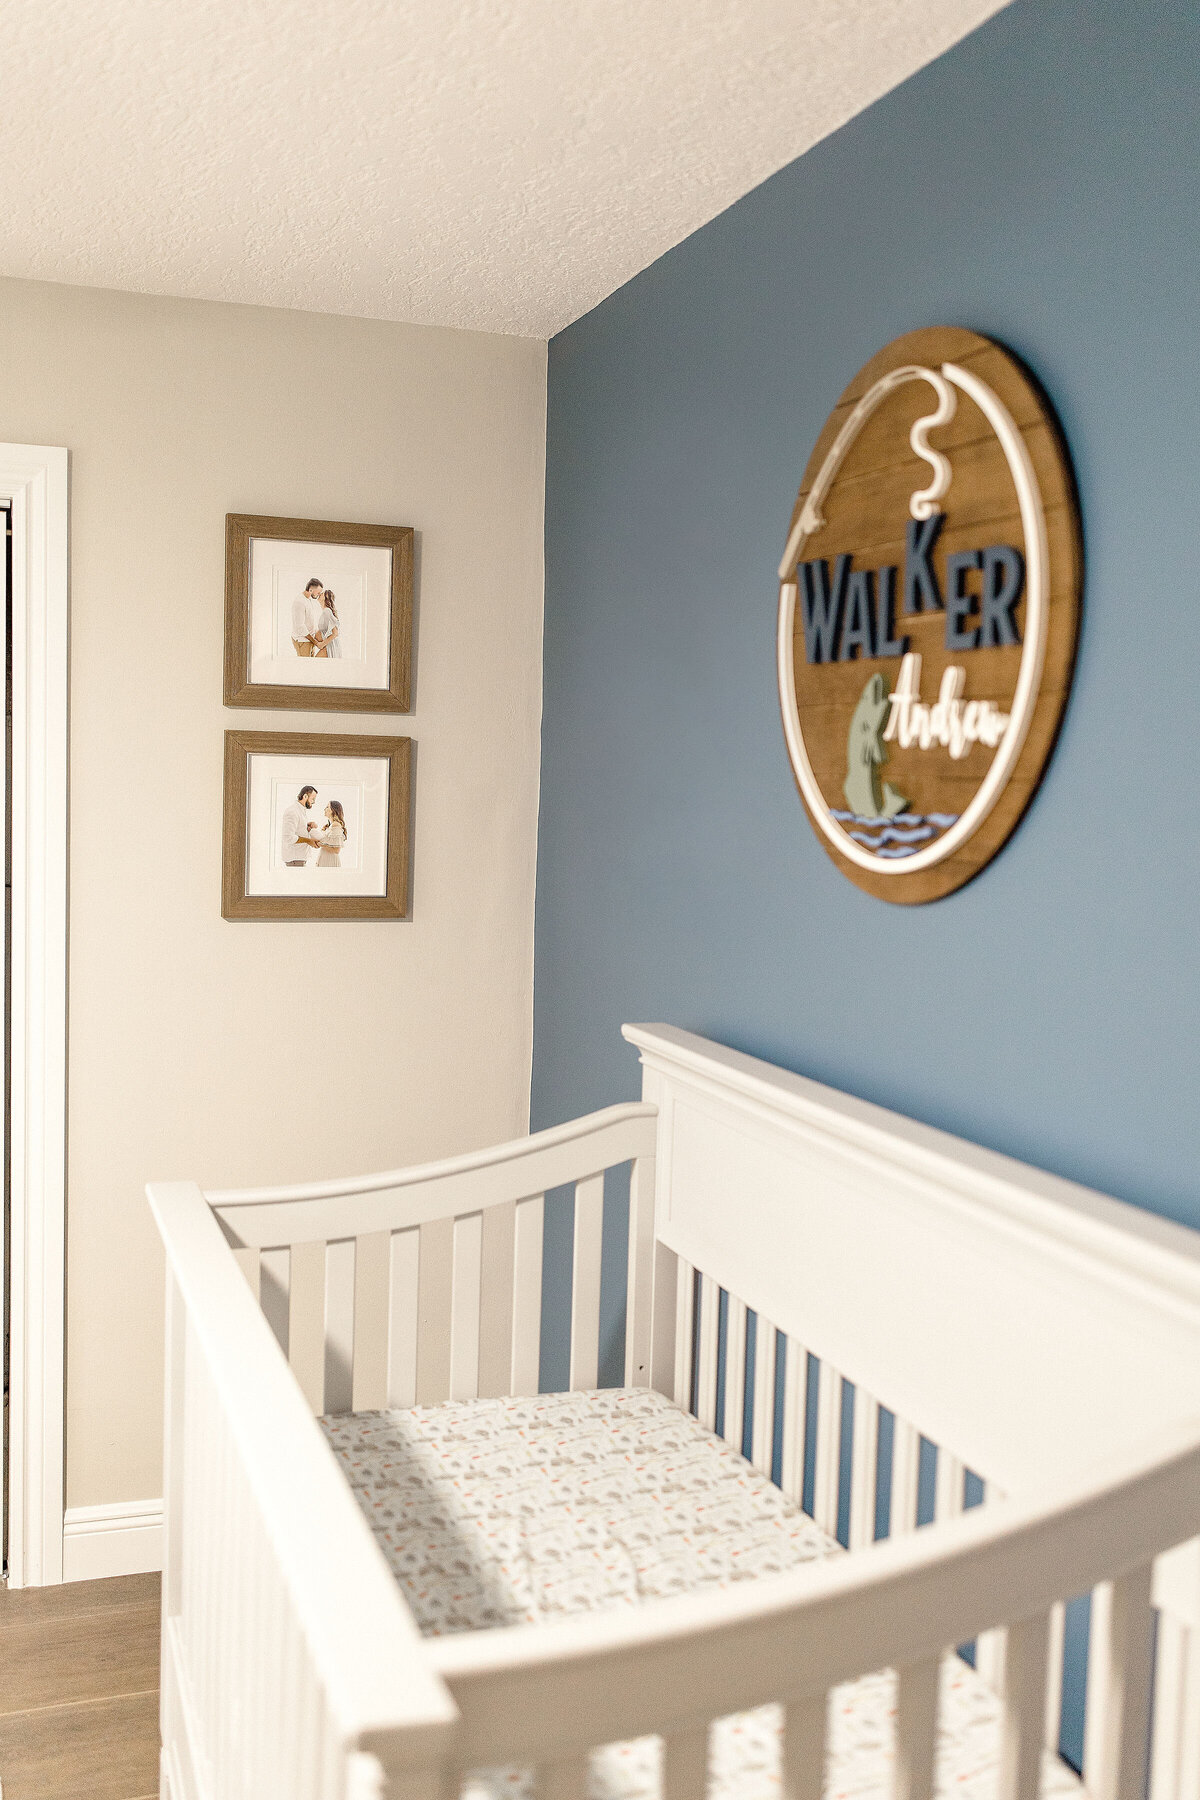 House in Miami with newborn photography frames over the crib by Ivanna Vidal Photography